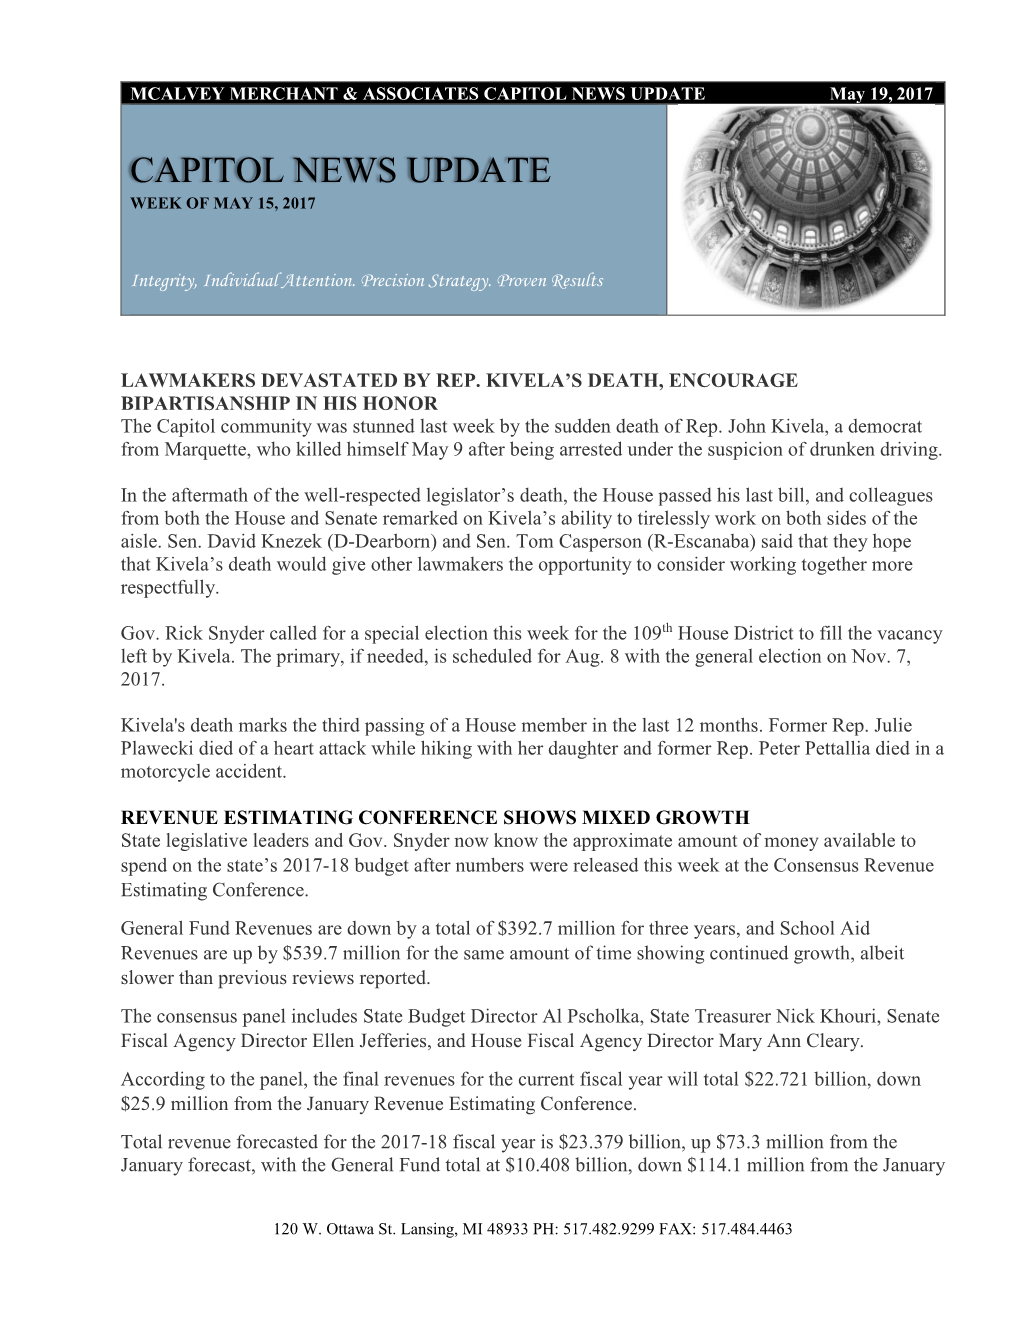 CAPITOL NEWS UPDATE May 19, 2017